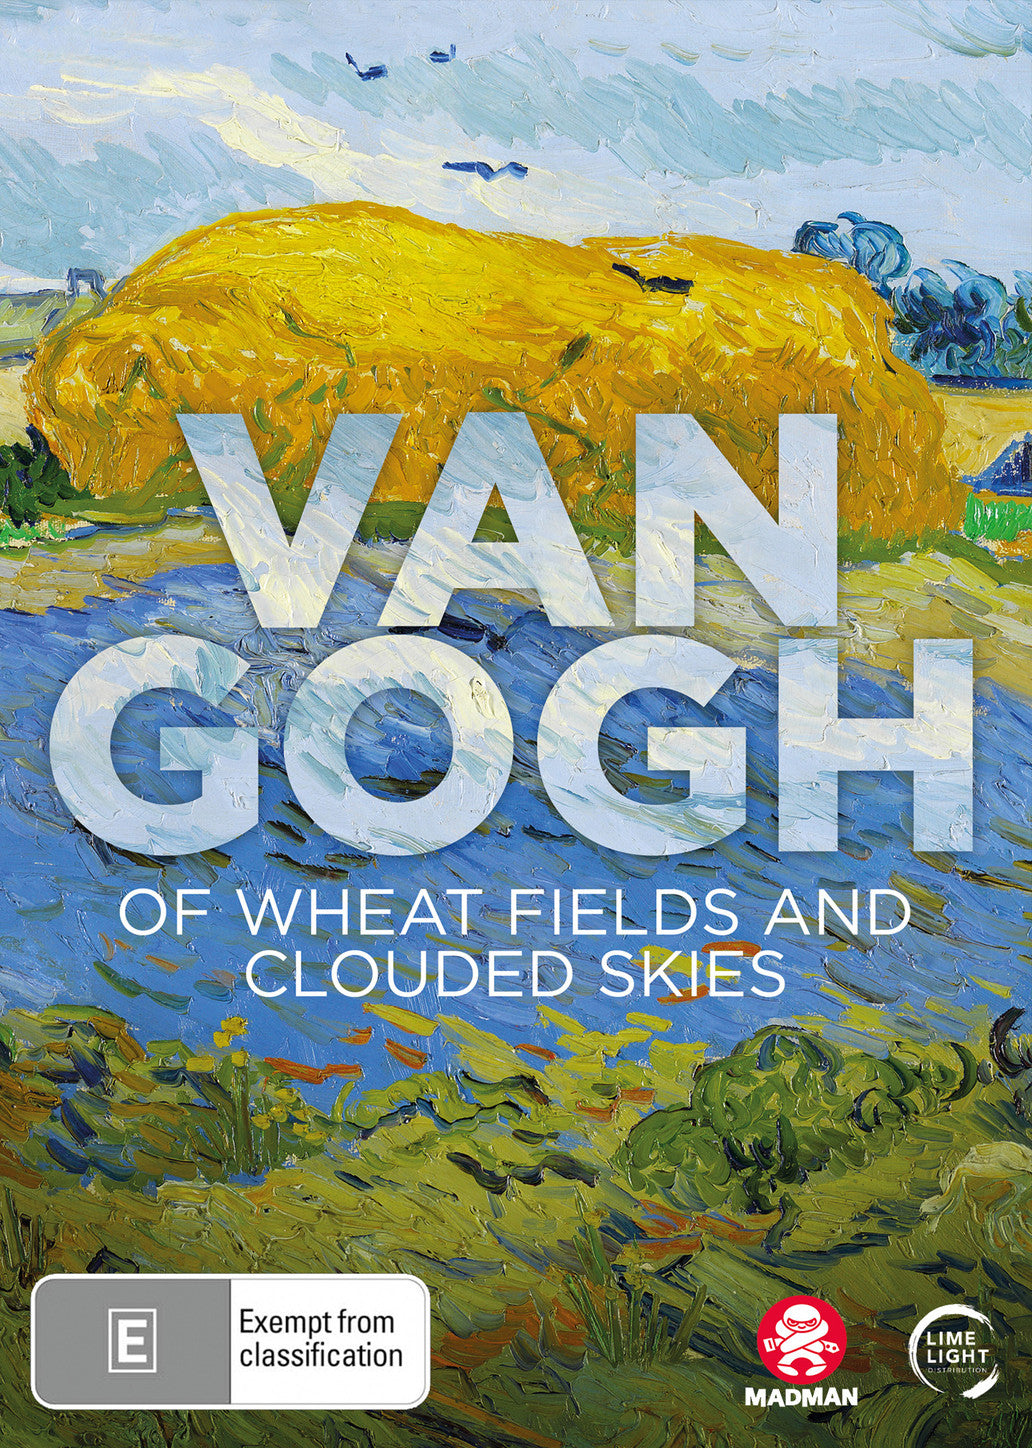 VAN GOGH: OF WHEAT FIELDS AND CLOUDED SKIES